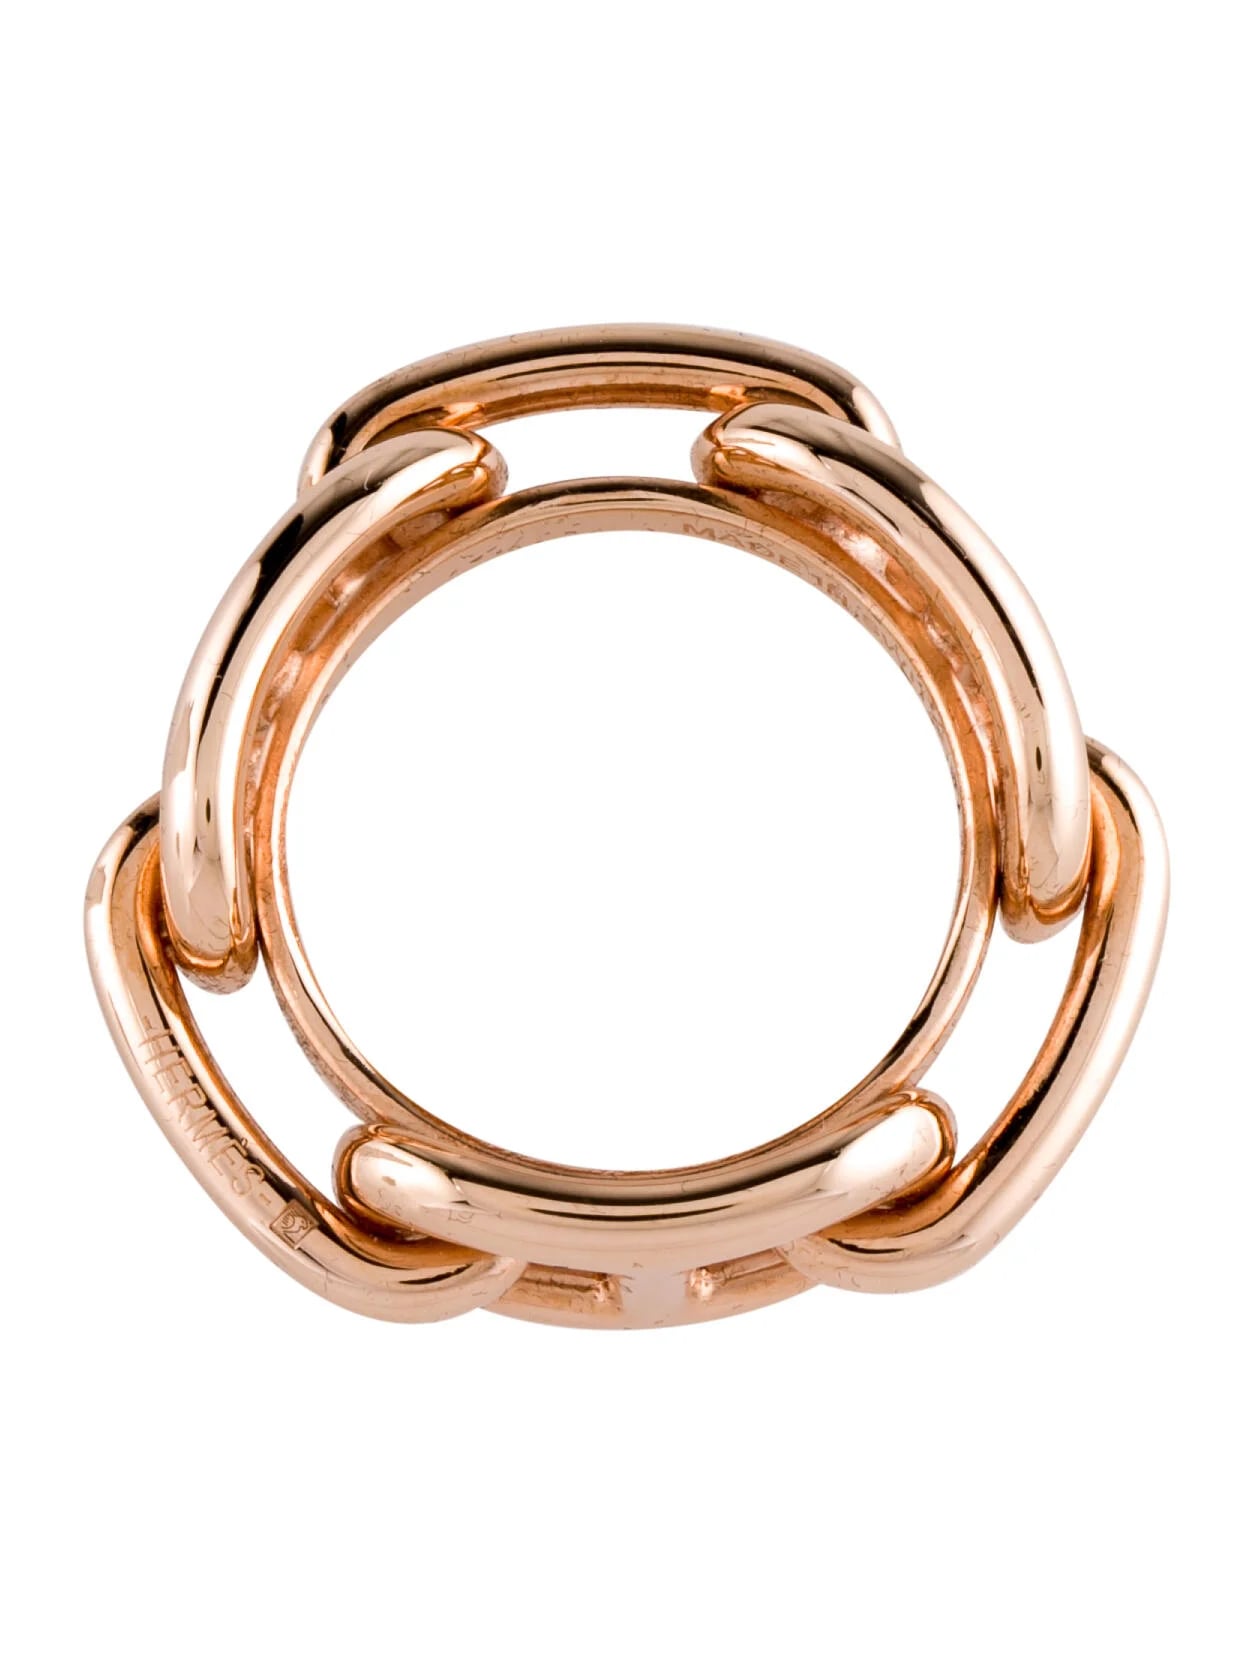 The Real Real Hermes Circular Scarf Ring, 7 Vintage Shops With The Best  Designer Finds For Holiday